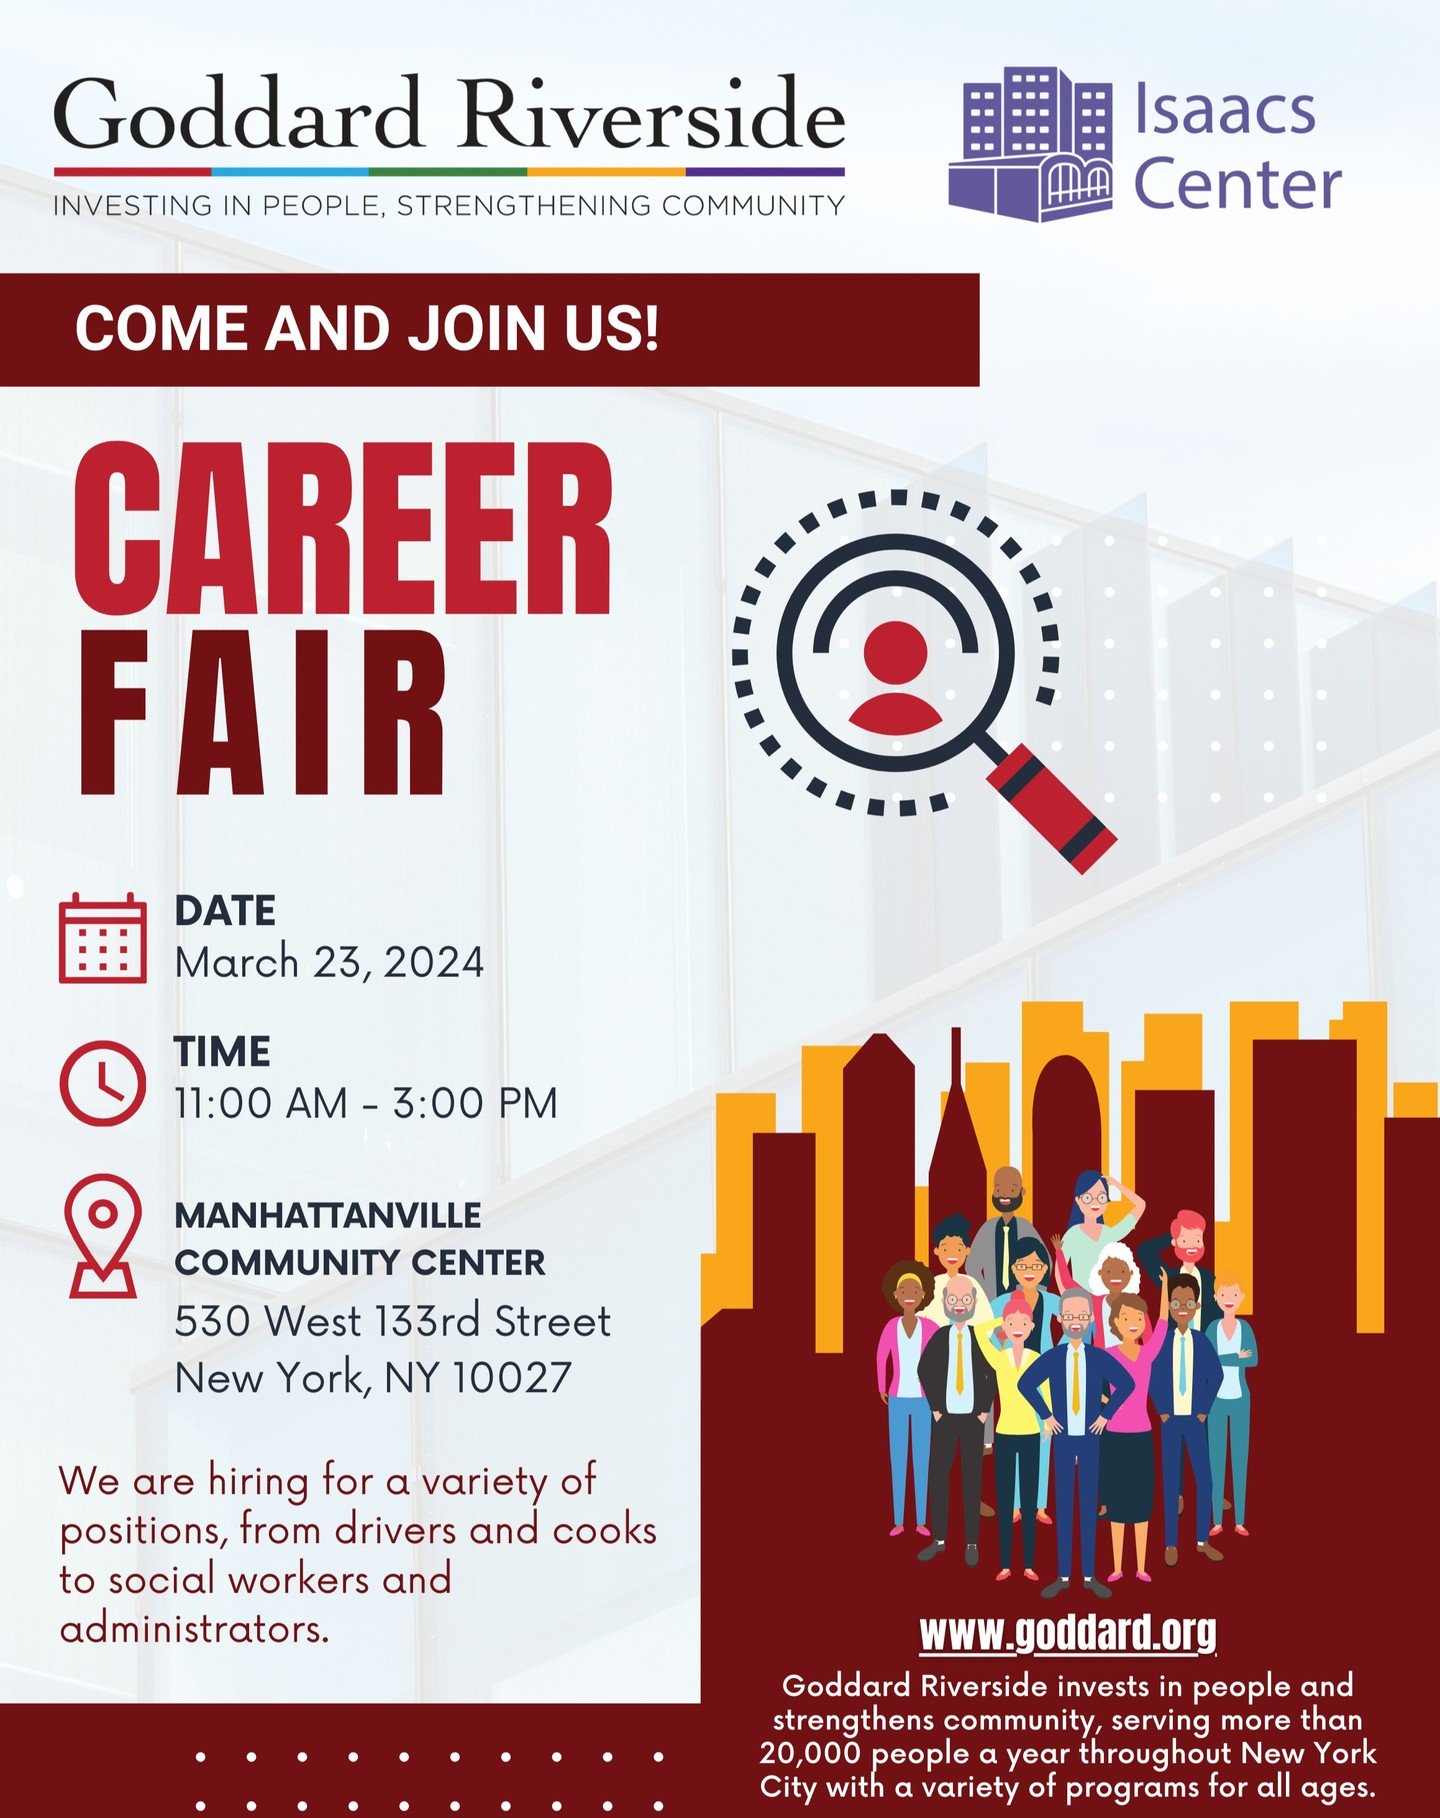 @goddardriverside is a local community center that provides a wide range of services to the Upper West Side. This Saturday, they are partnering with UES-based @isaacscenternyc to host a career fair for a wide variety of positions. If you or a loved o